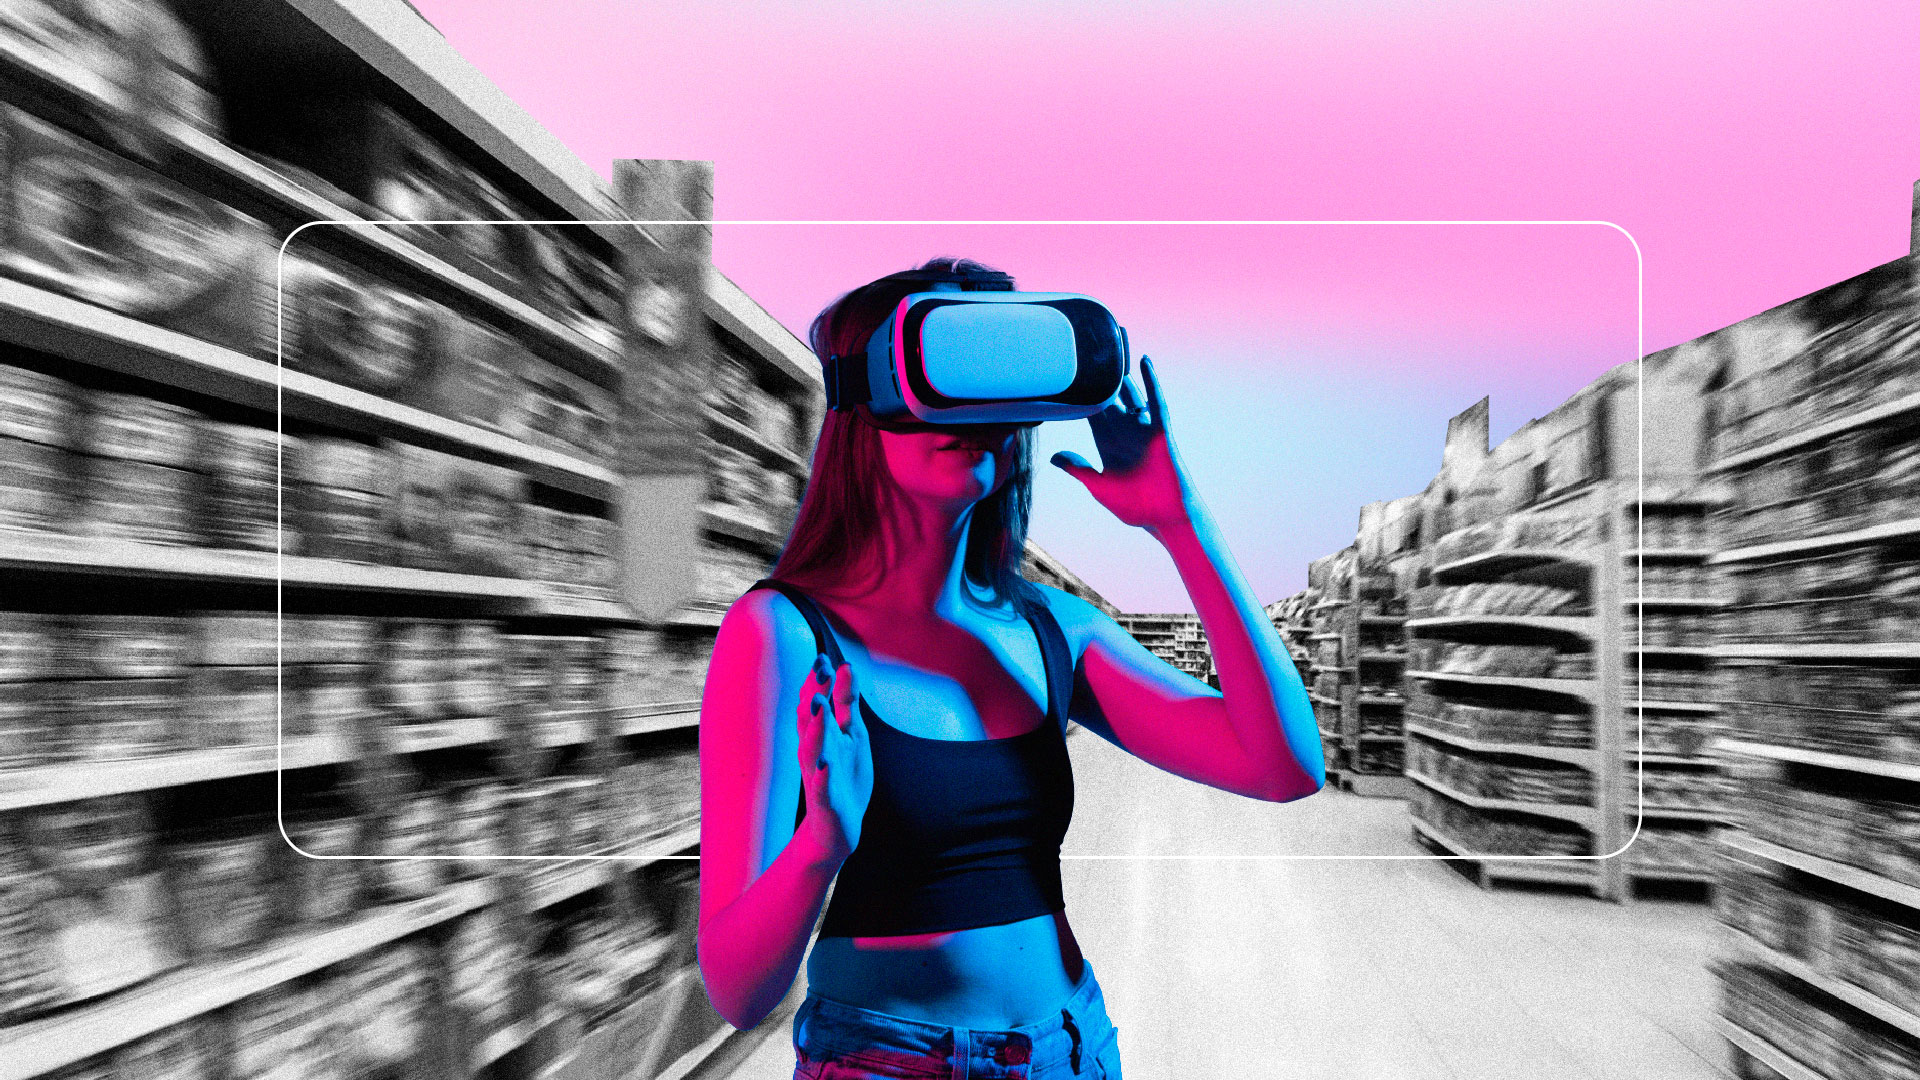 https://www.mjvinnovation.com/wp-content/uploads/2024/02/cover-image-article-7-ways-brick-and-mortar-is-changing-mjv-technology-innovation.jpg